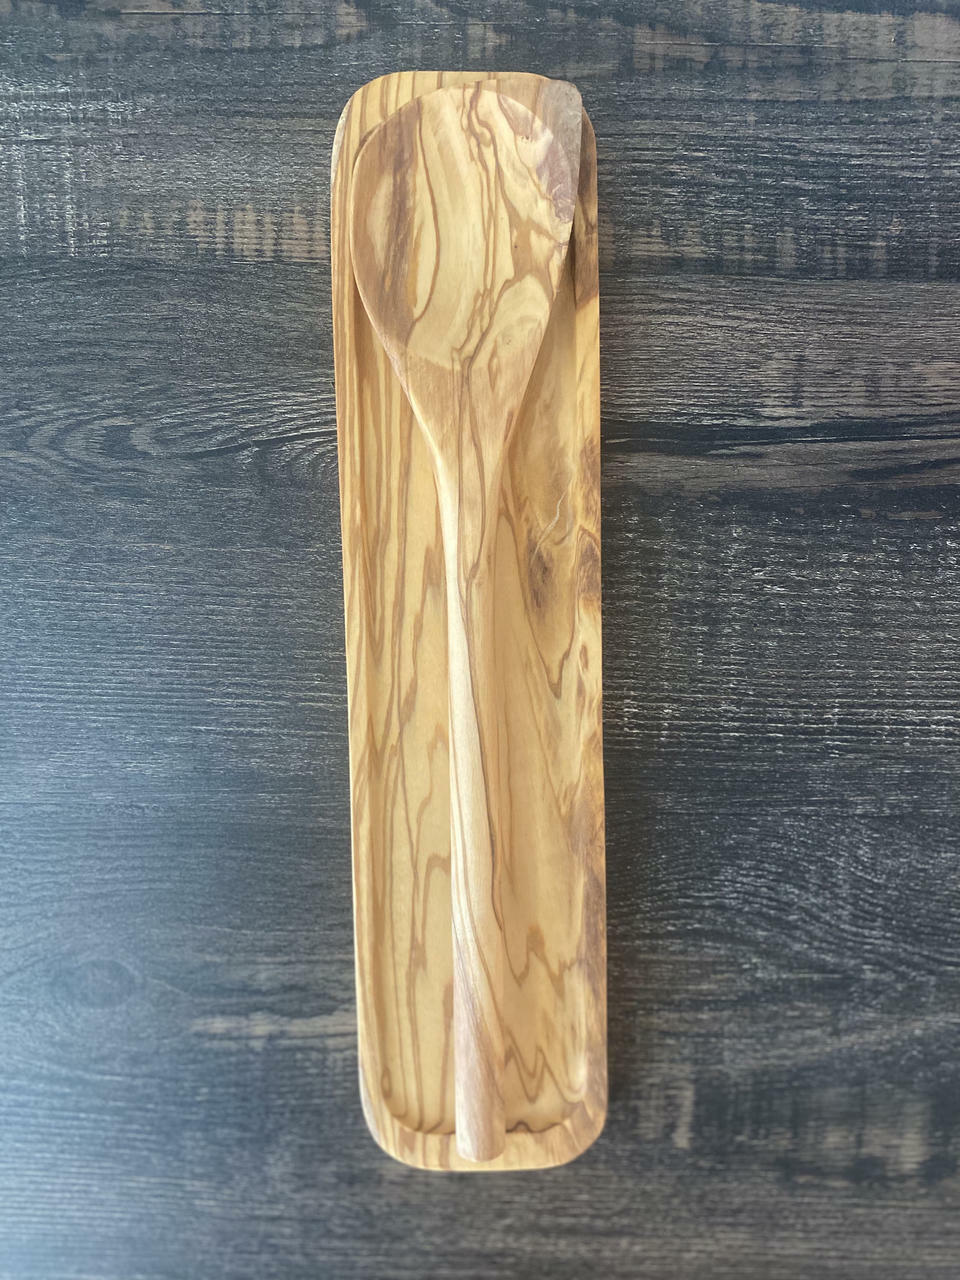 Olivewood Spoon Rest + Reviews